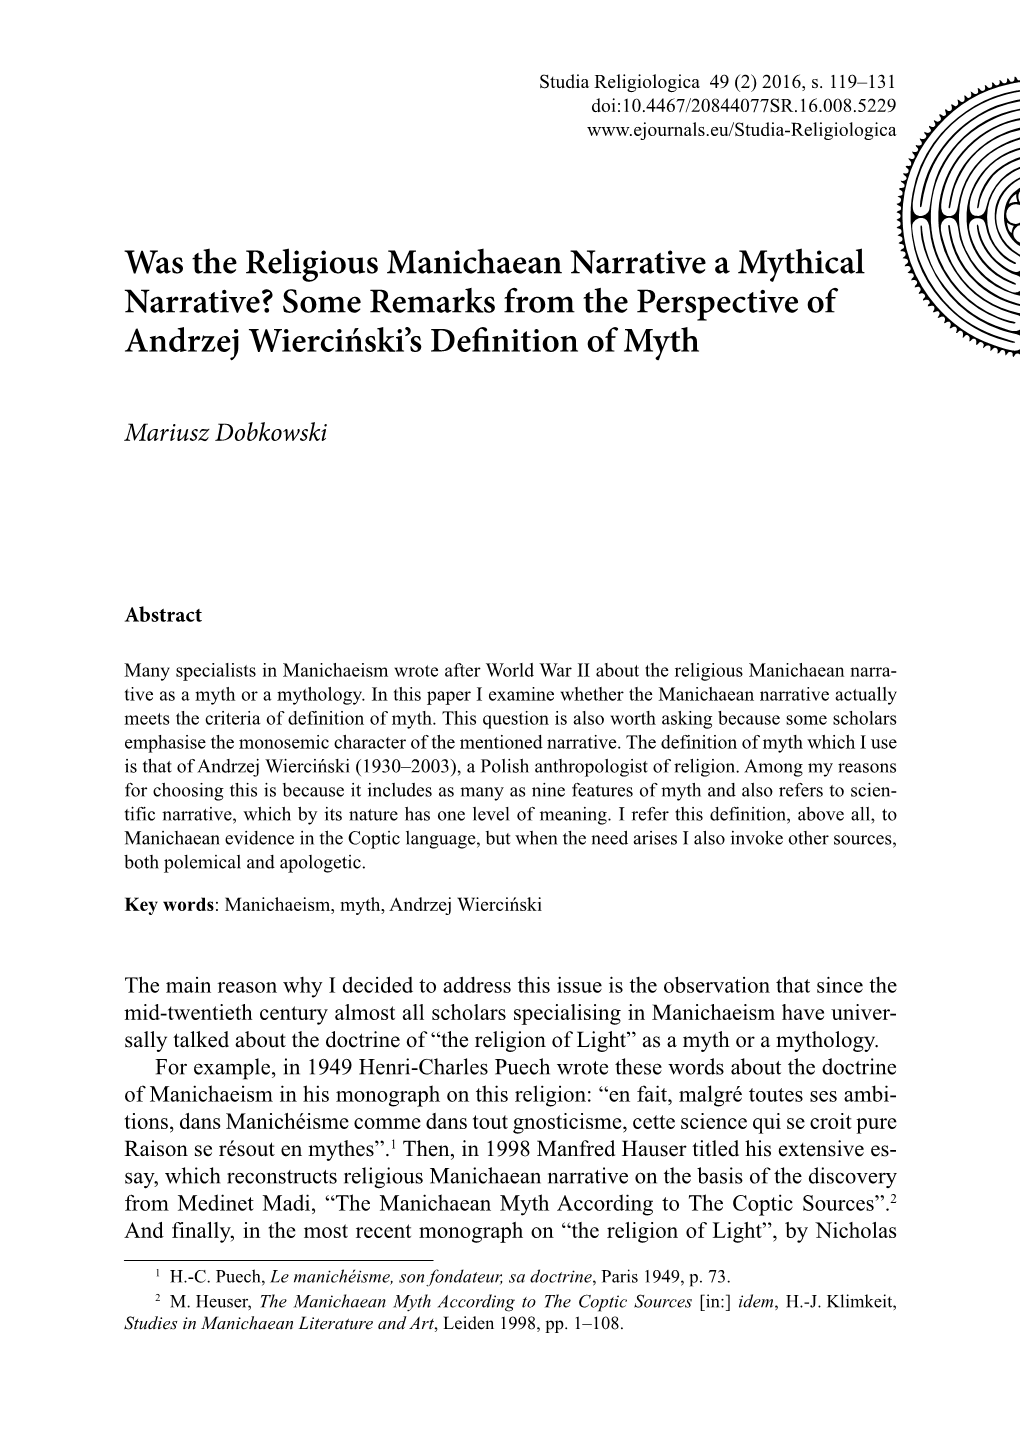 Was the Religious Manichaean Narrative a Mythical Narrative? Some Remarks from the Perspective of Andrzej Wierciński’S Definition of Myth